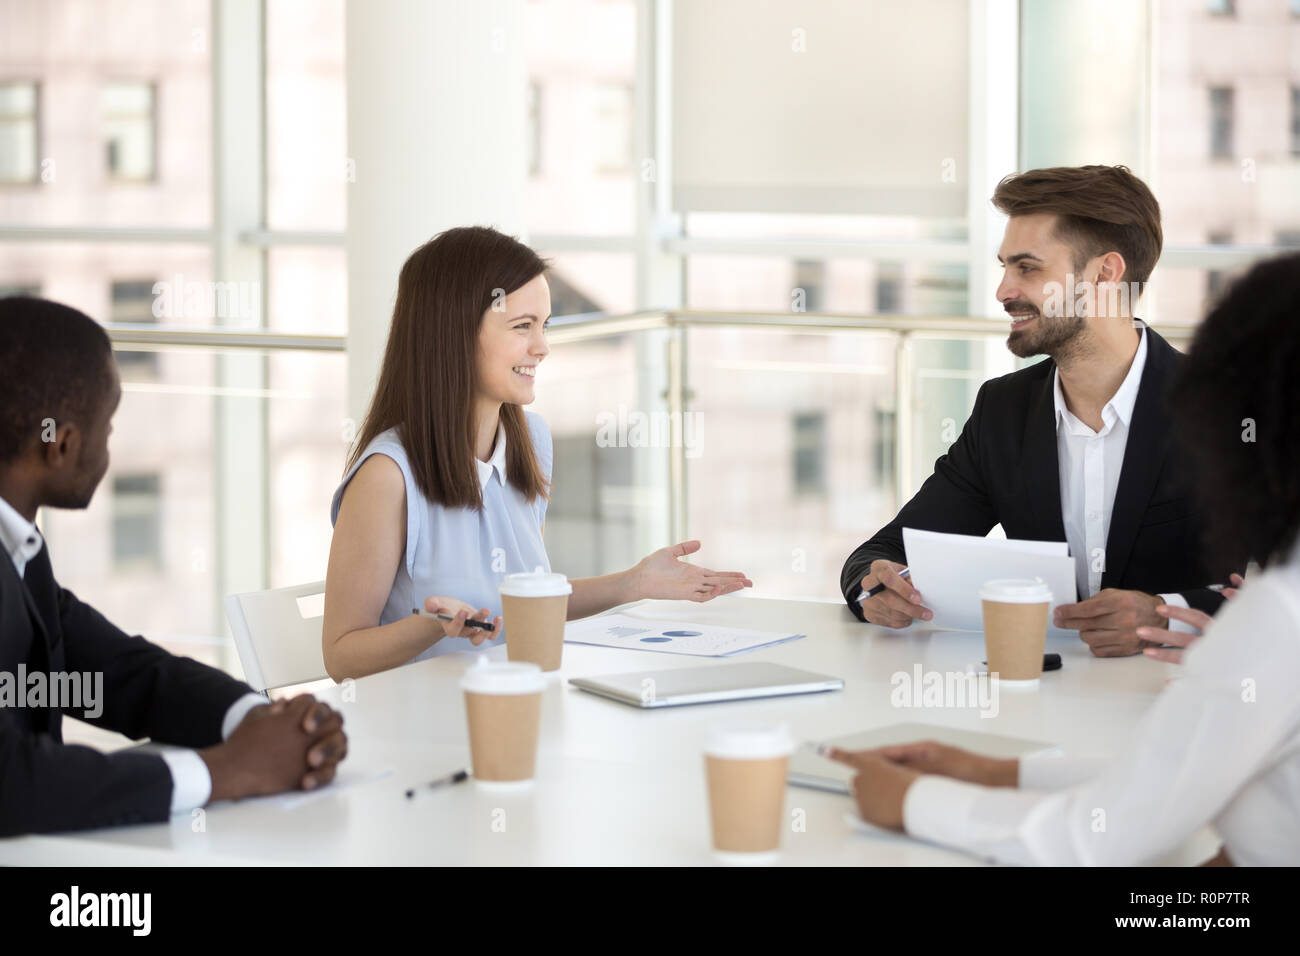 Millennial employees smiling negotiating at office briefing Stock Photo